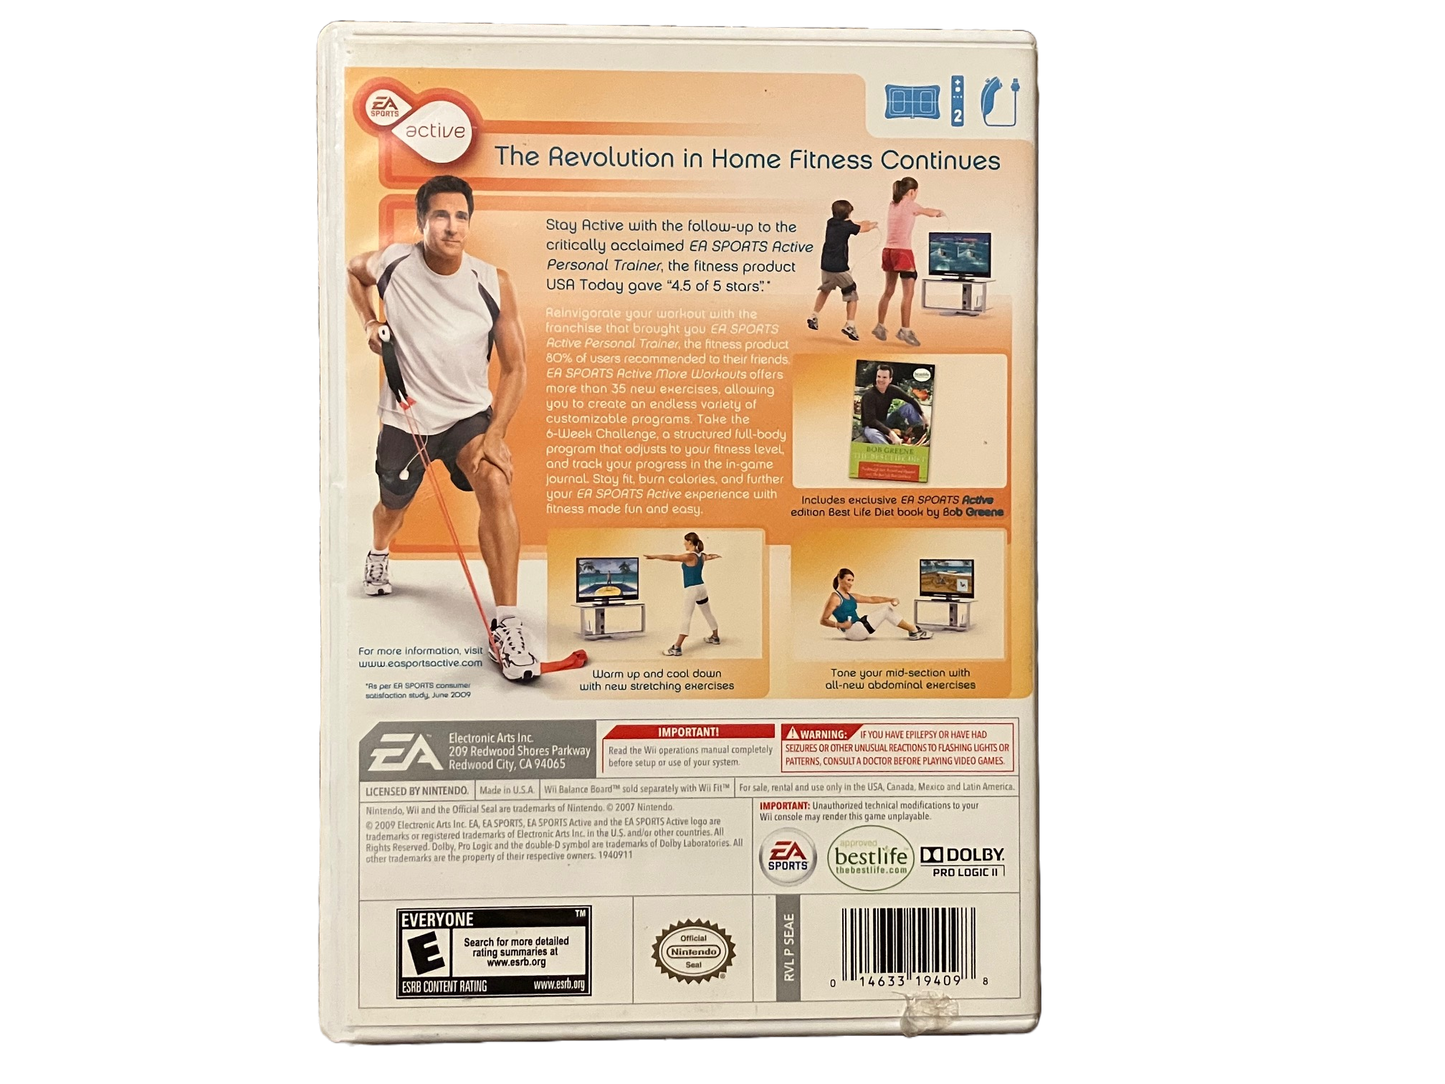 EA Sports Active More Workouts Nintendo Wii